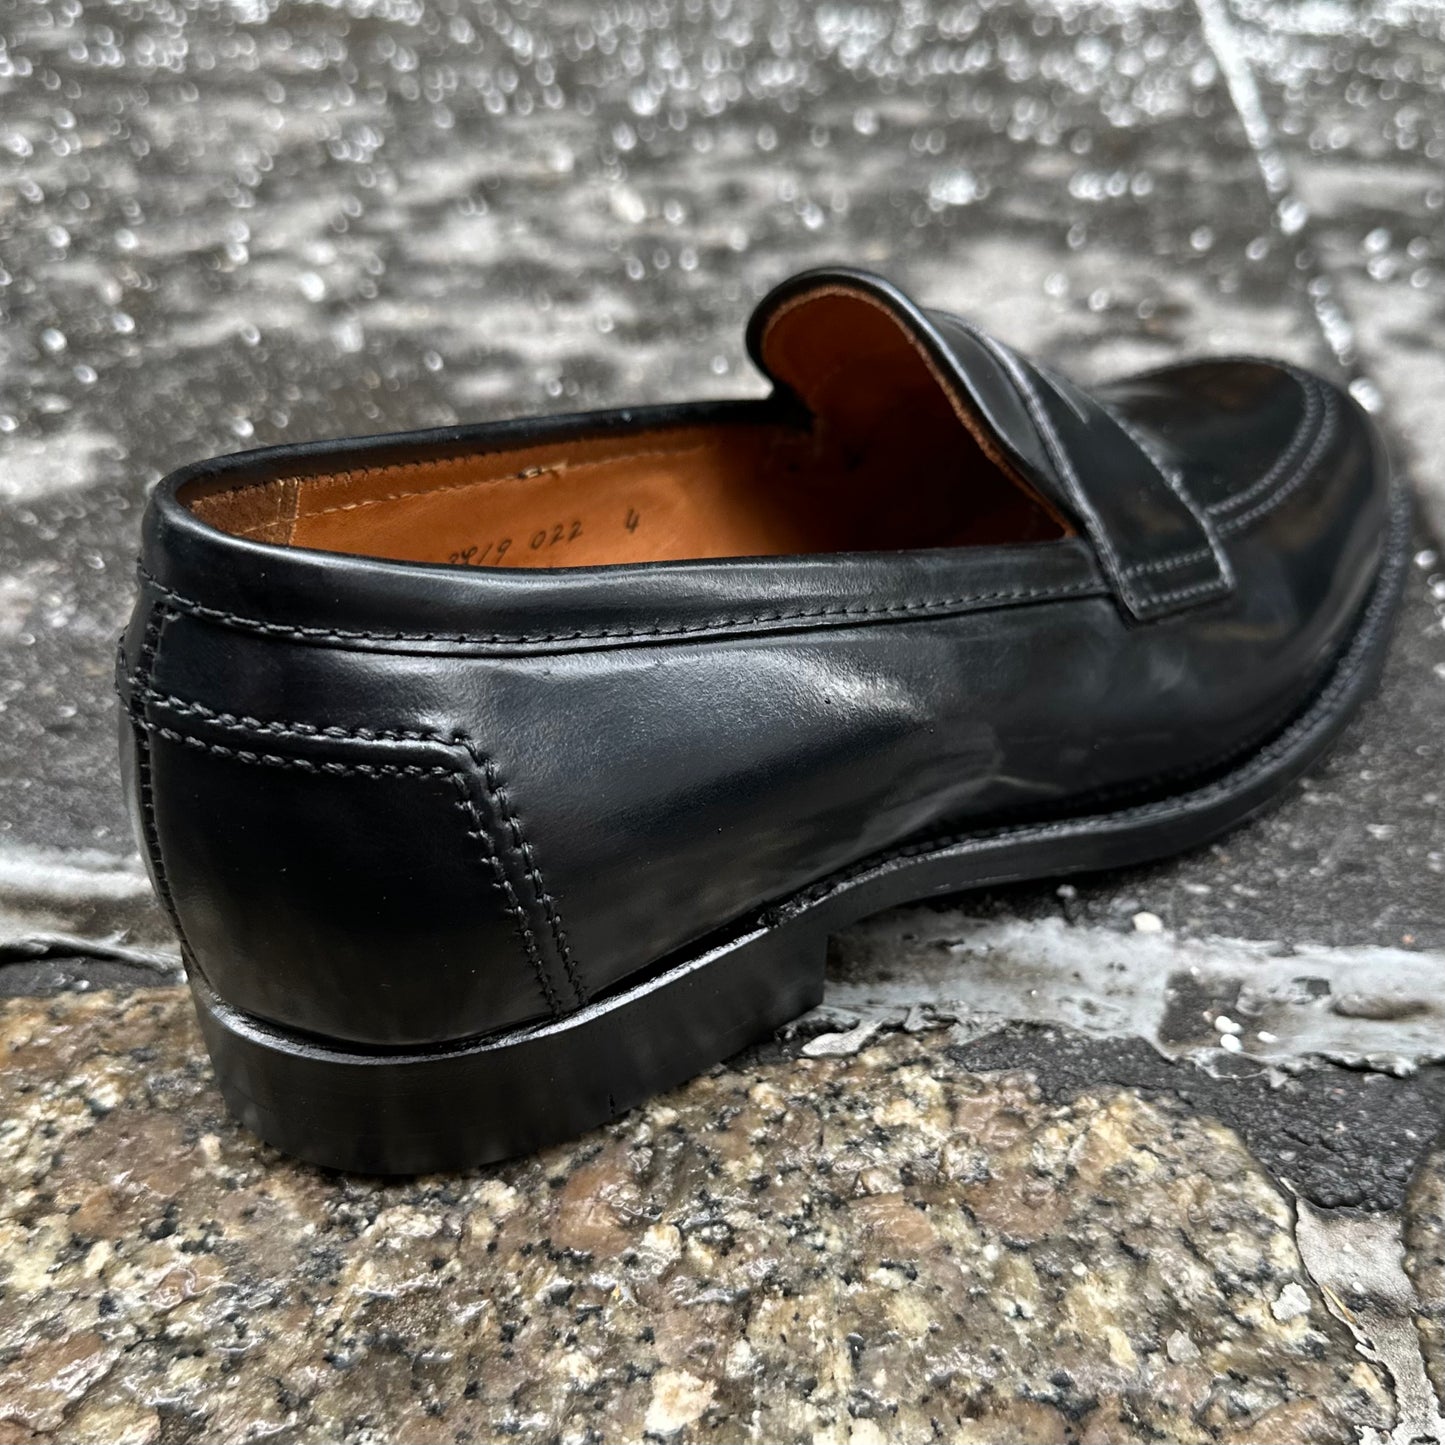 D2221 - Madison Penny in Black Shell Cordovan